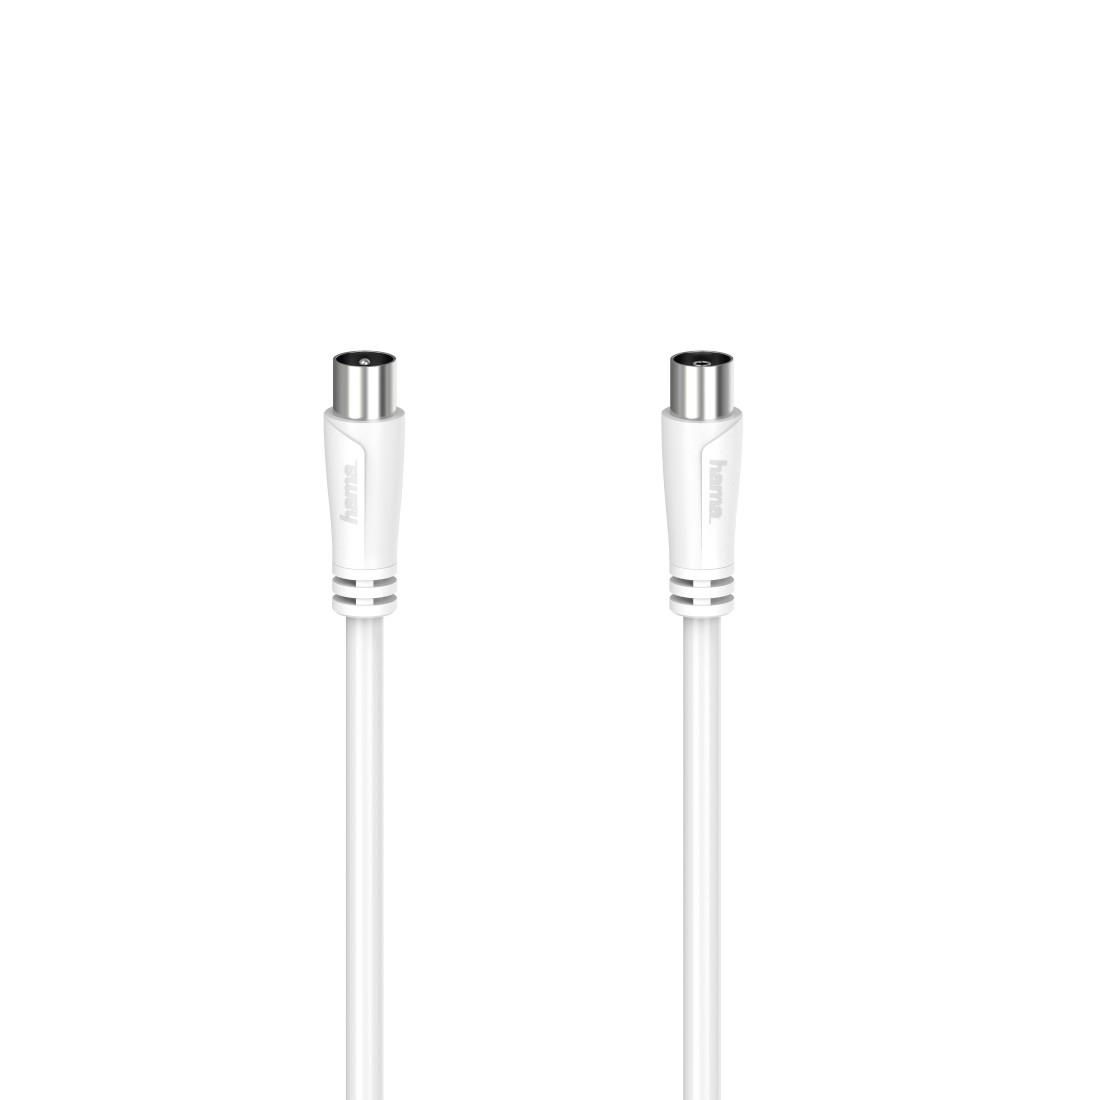 Hama 205047 W128824517 7 Coaxial Cable 5 M White 